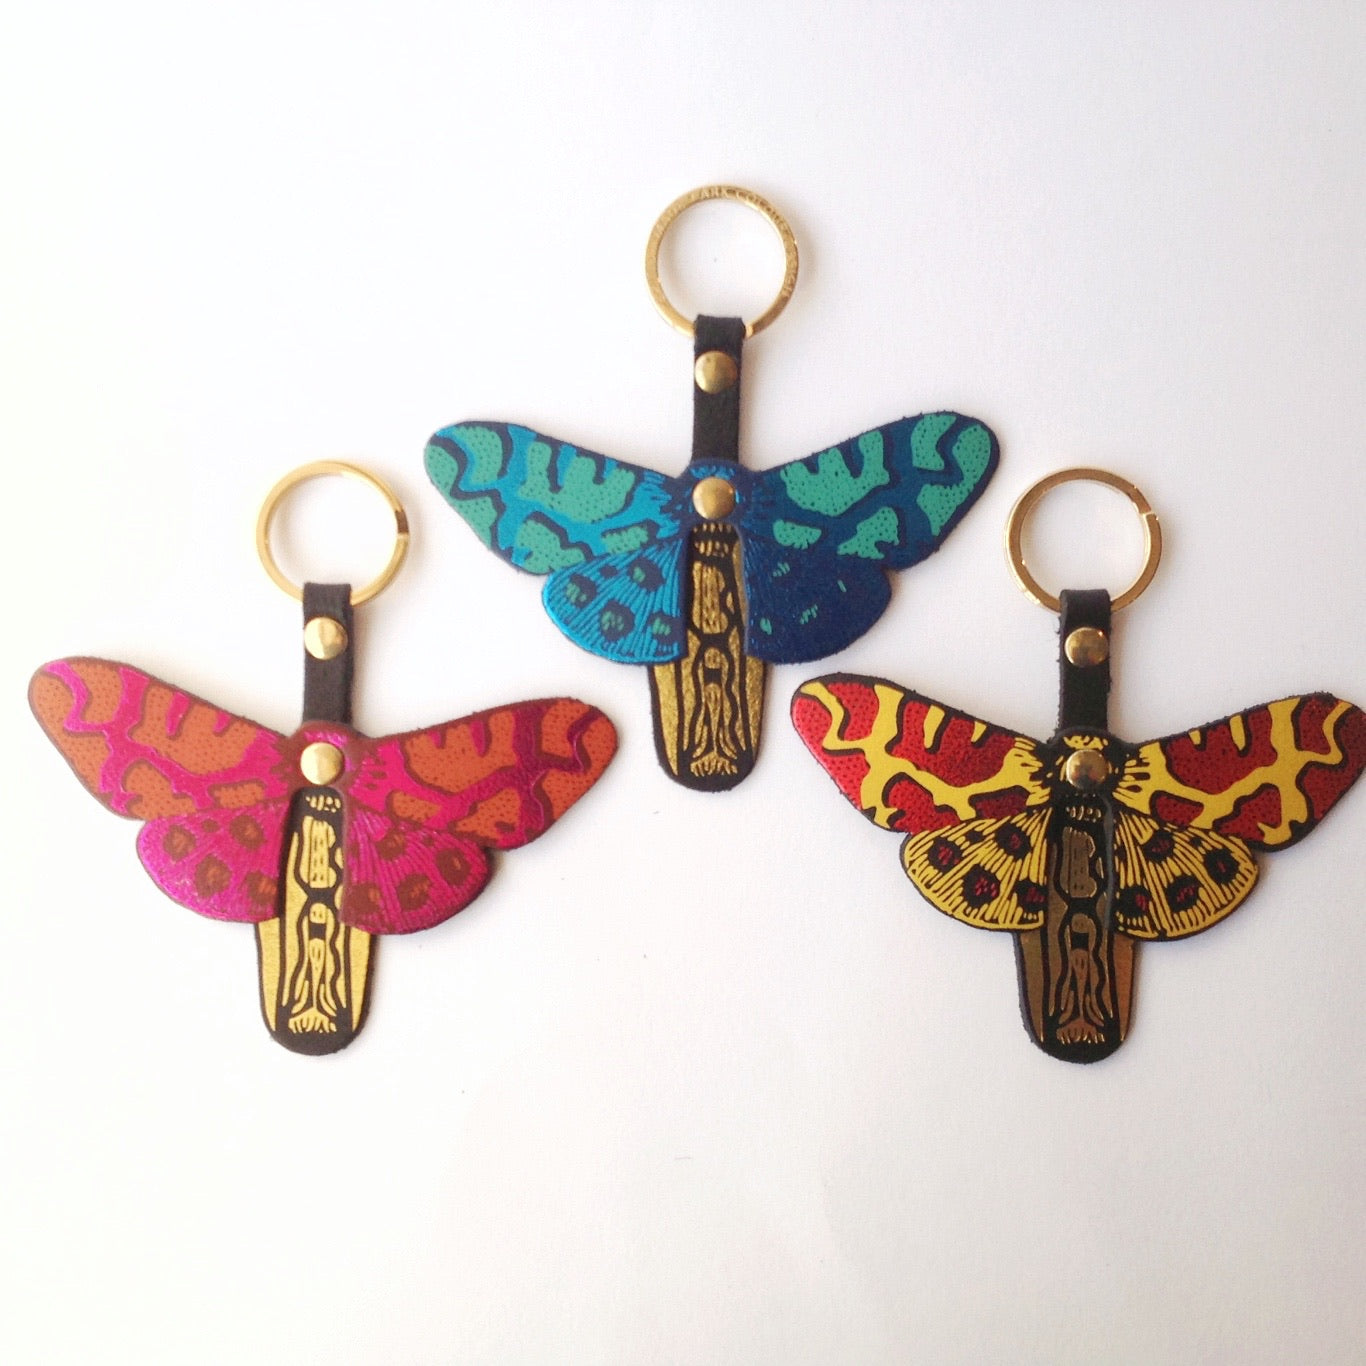 Leather Butterfly bag charm/keyring